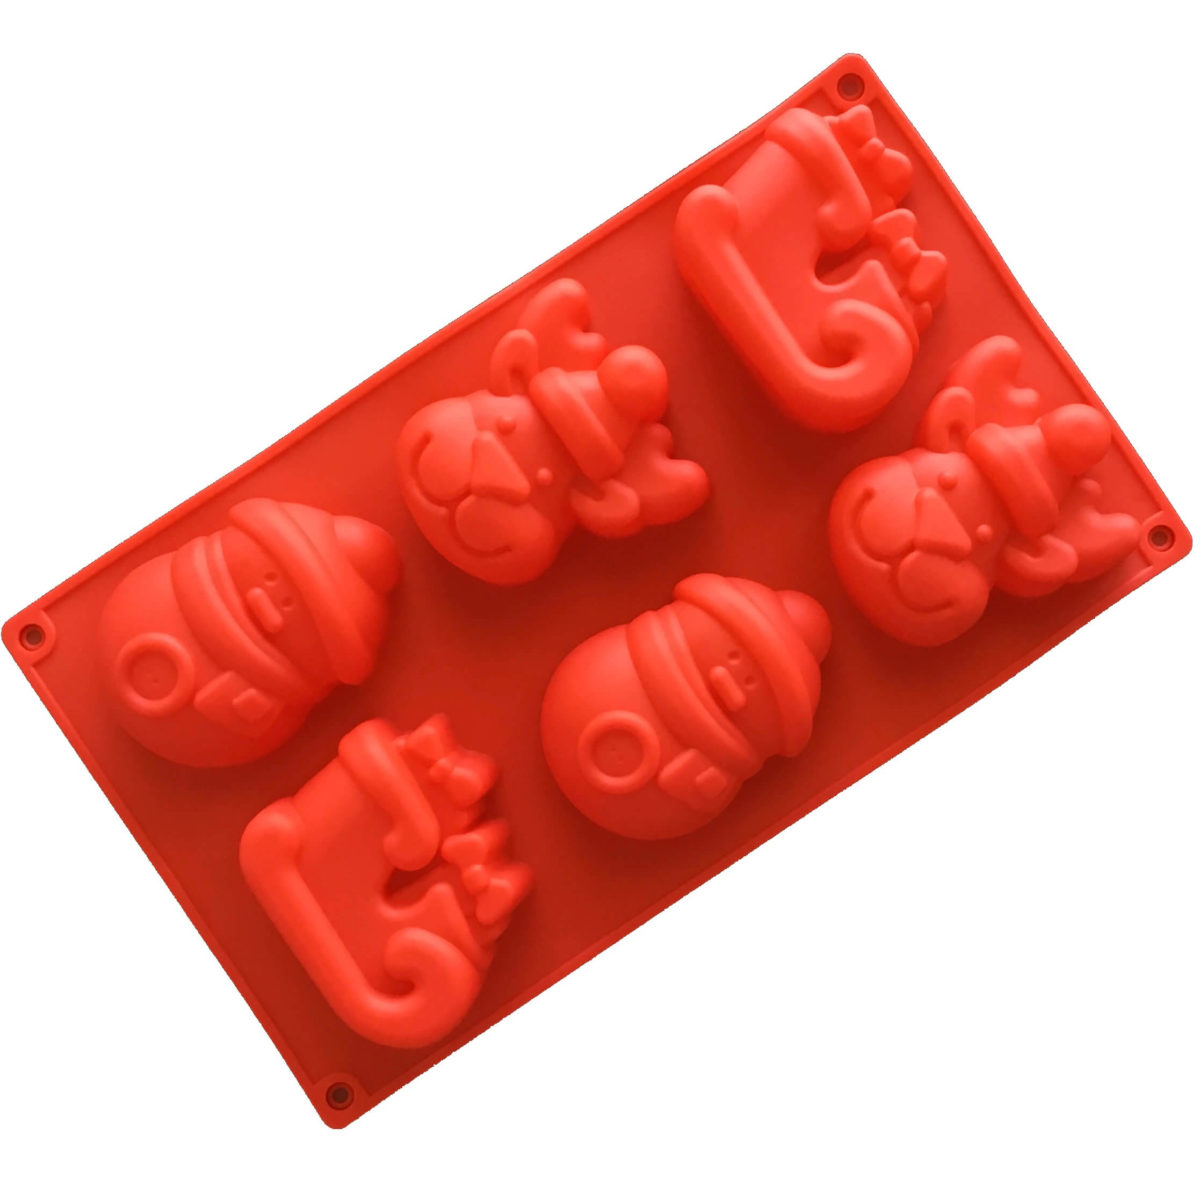 red christmas themed silicone mould with six cavities - two each of santa sleigh, reindeer face, snowman cavities